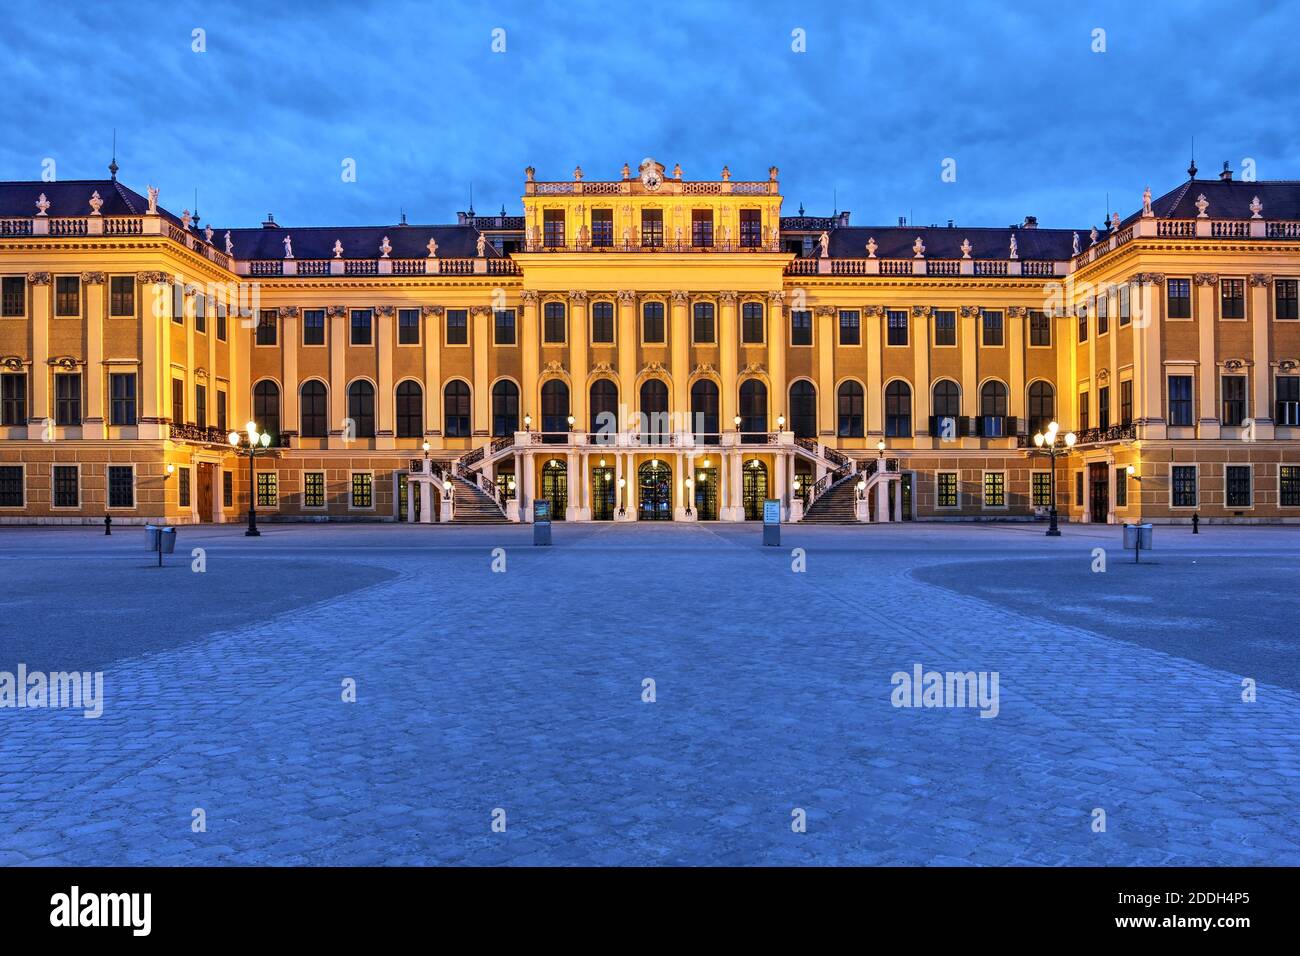 Night scene of the famous Schönbrunn Palace (the main summer residence of the Habsburg family) in Vienna, Austria. Stock Photo